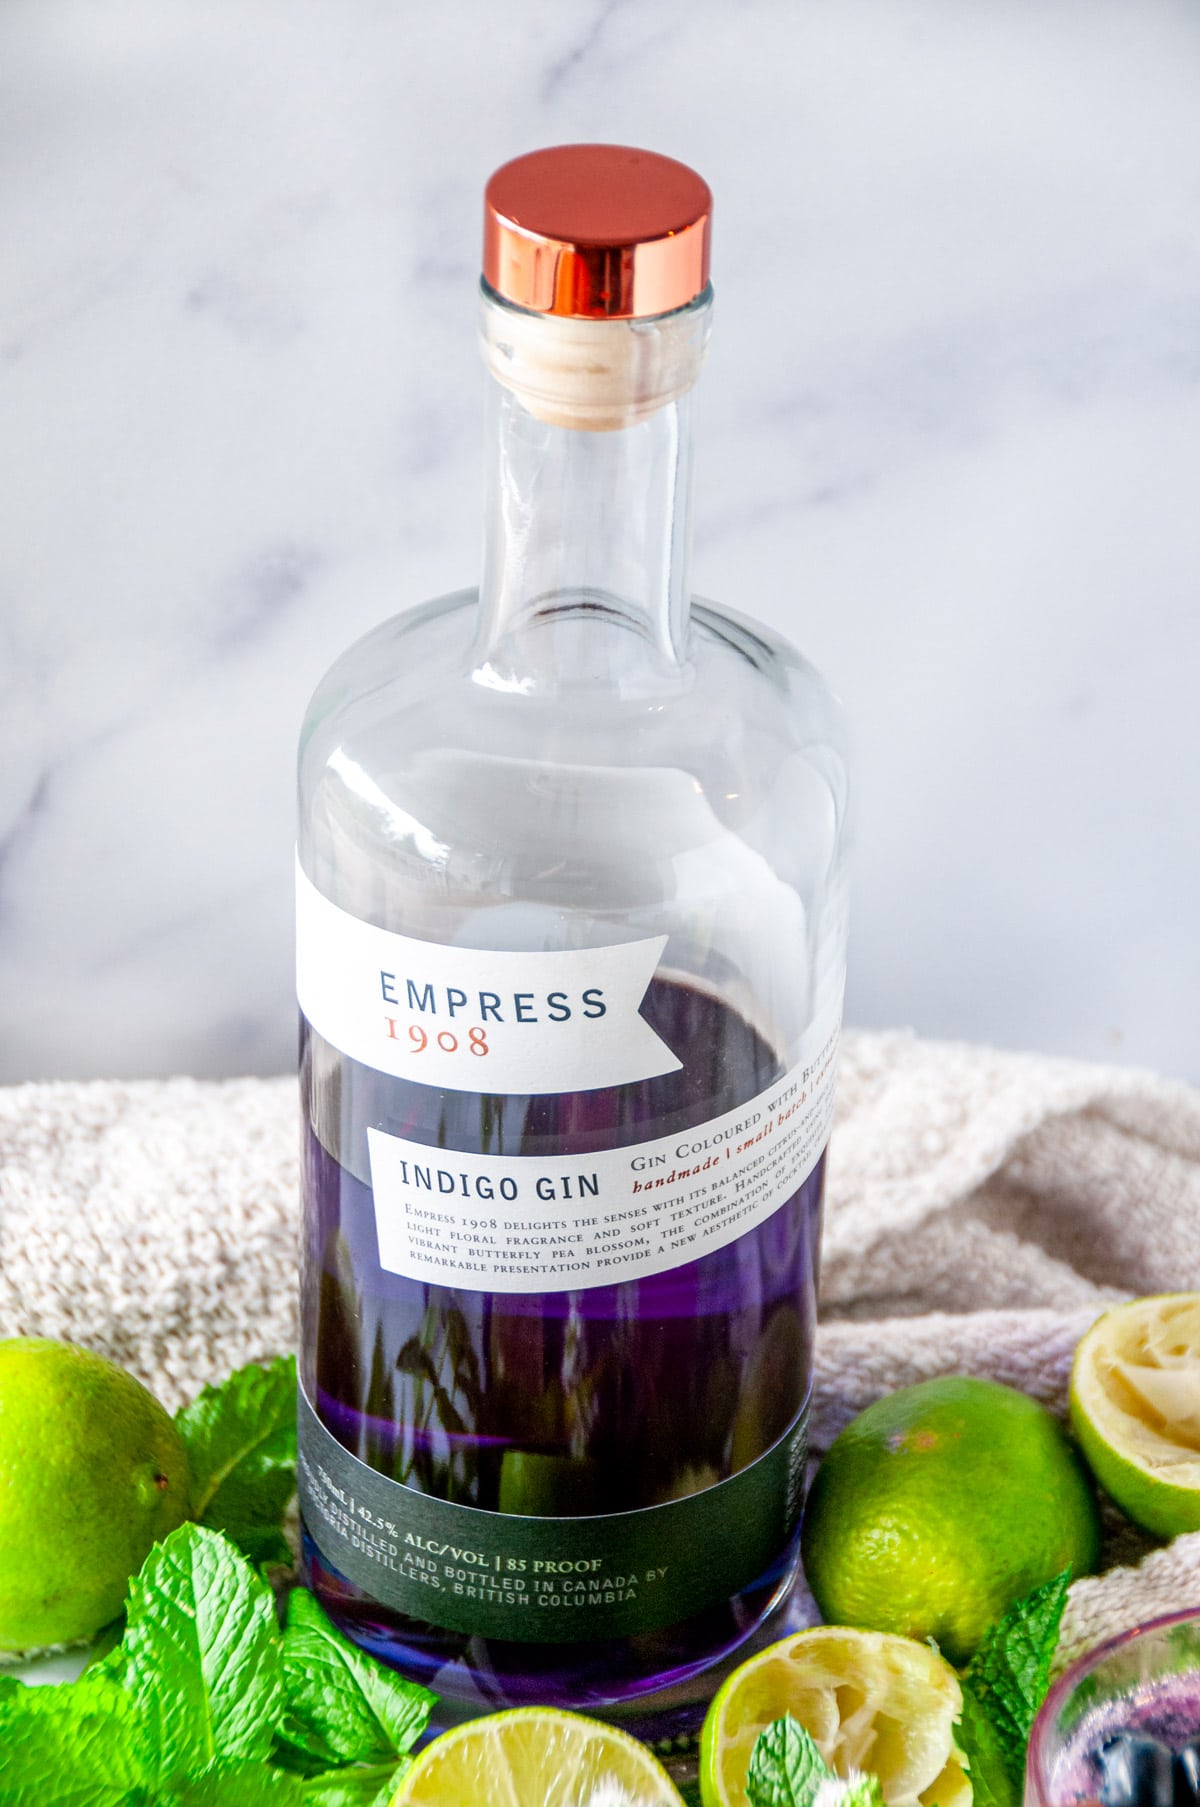 Purple empress gin bottle with white marble background surrounded by mint leaves and lime wedges.